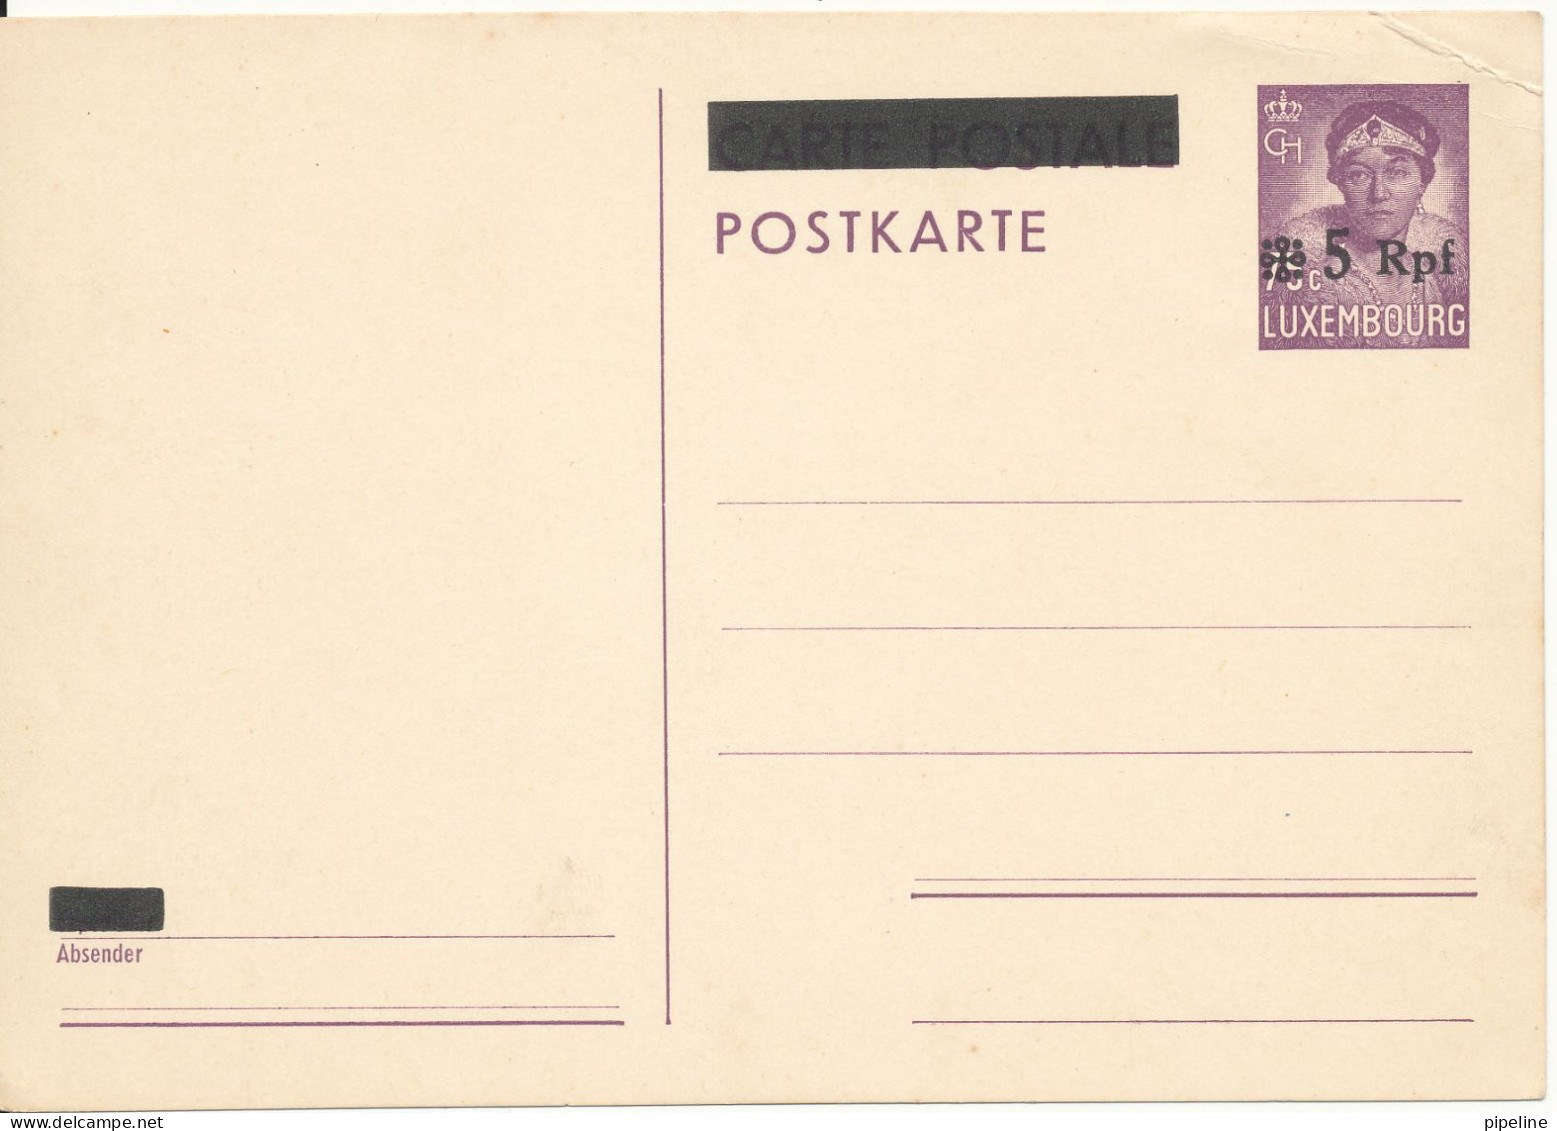 Luxembourg Postal Stationery Postcard Overprinted In Mint Condition (a Weak Corner Of The Card) - Enteros Postales